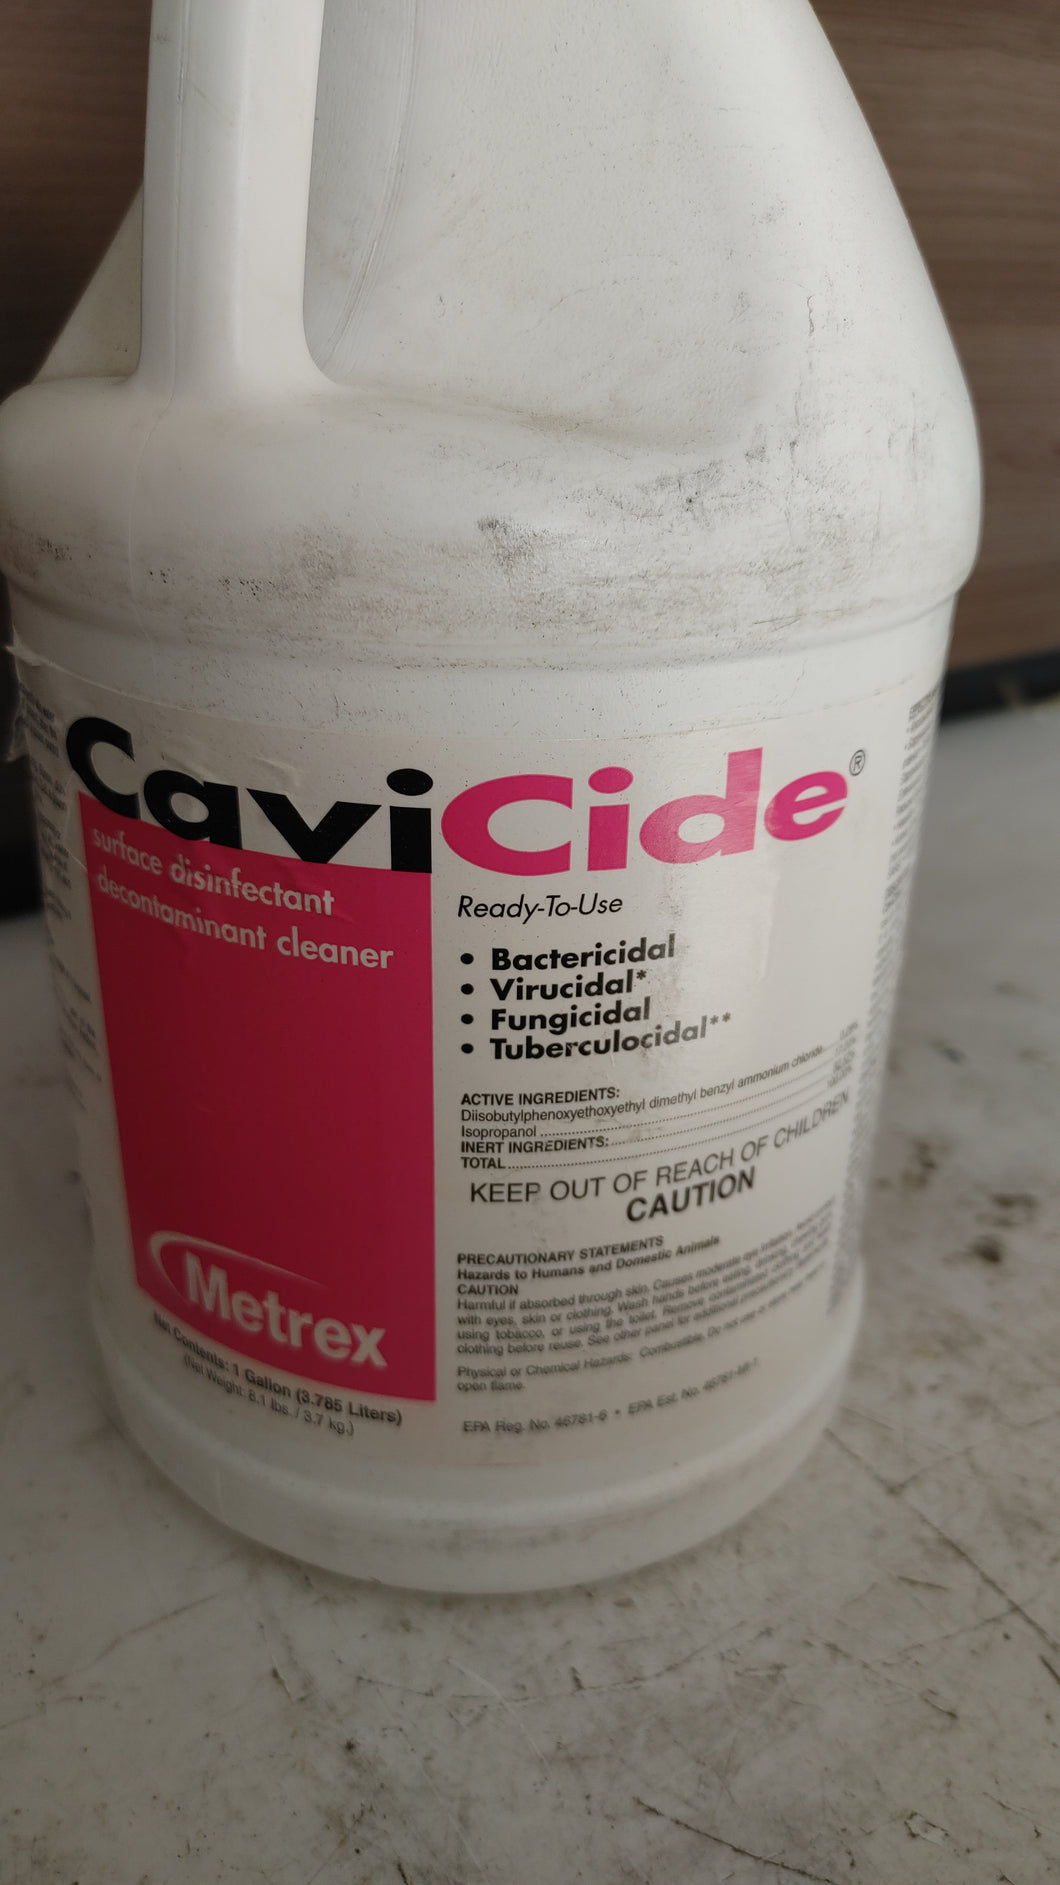 13-1000 - Cavicide Disinfectant Pack of 3